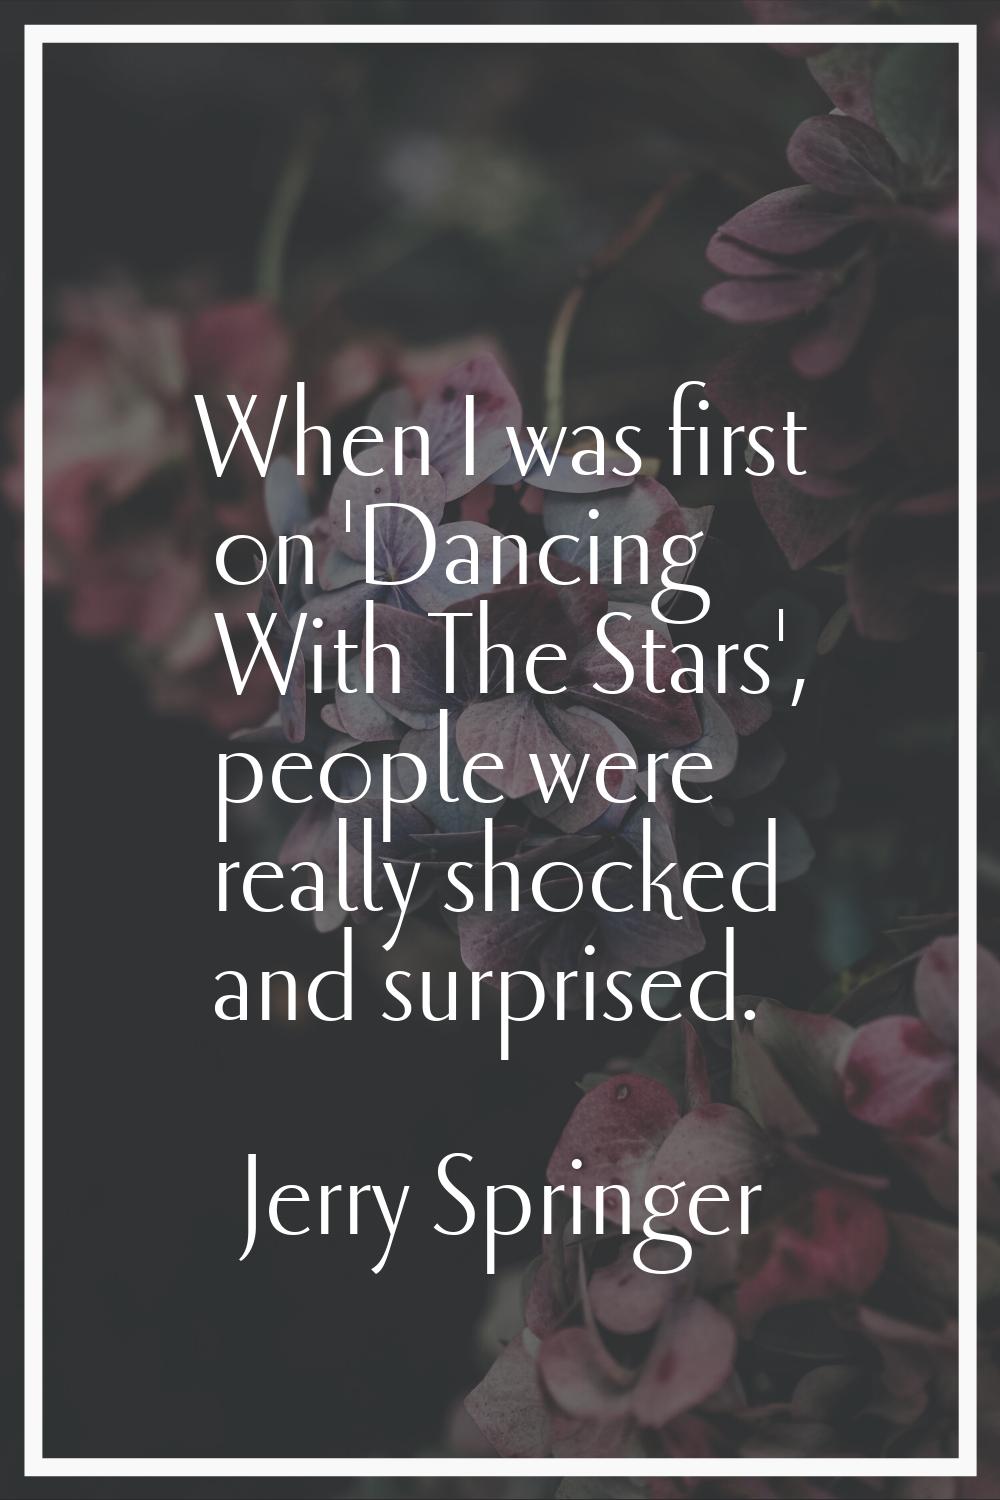 When I was first on 'Dancing With The Stars', people were really shocked and surprised.